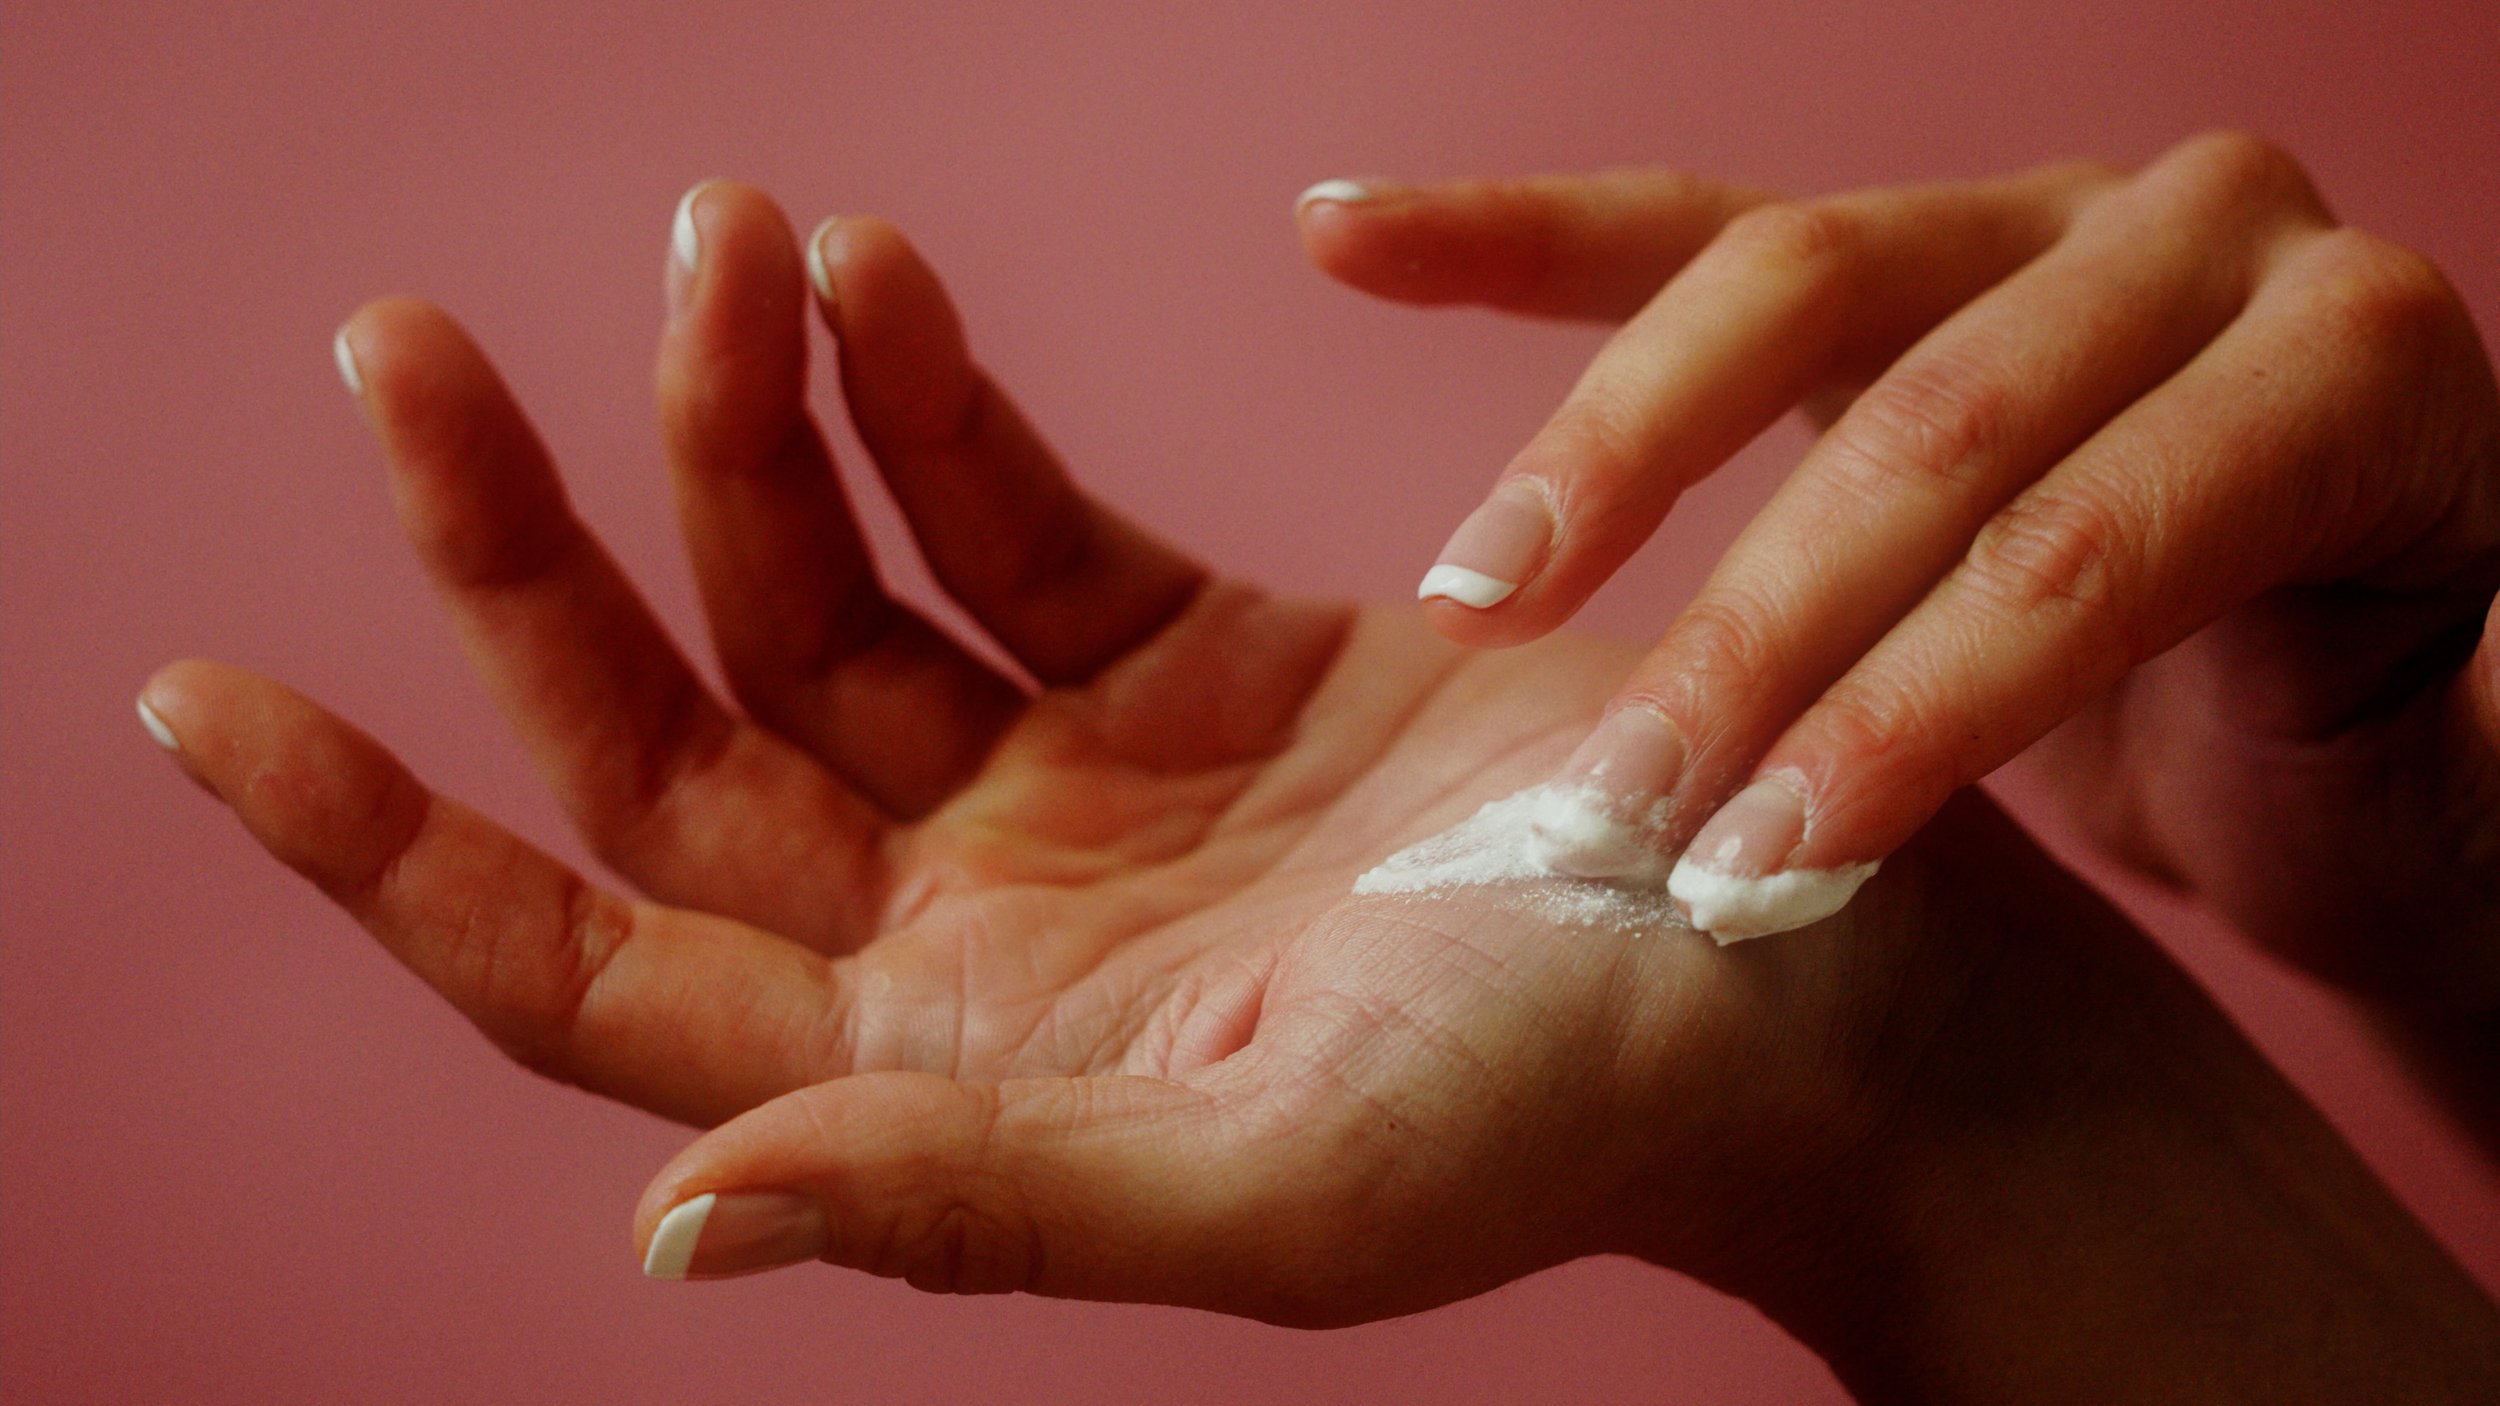 Beauty shot of hands applying lotion in soft light, The Kiln video production